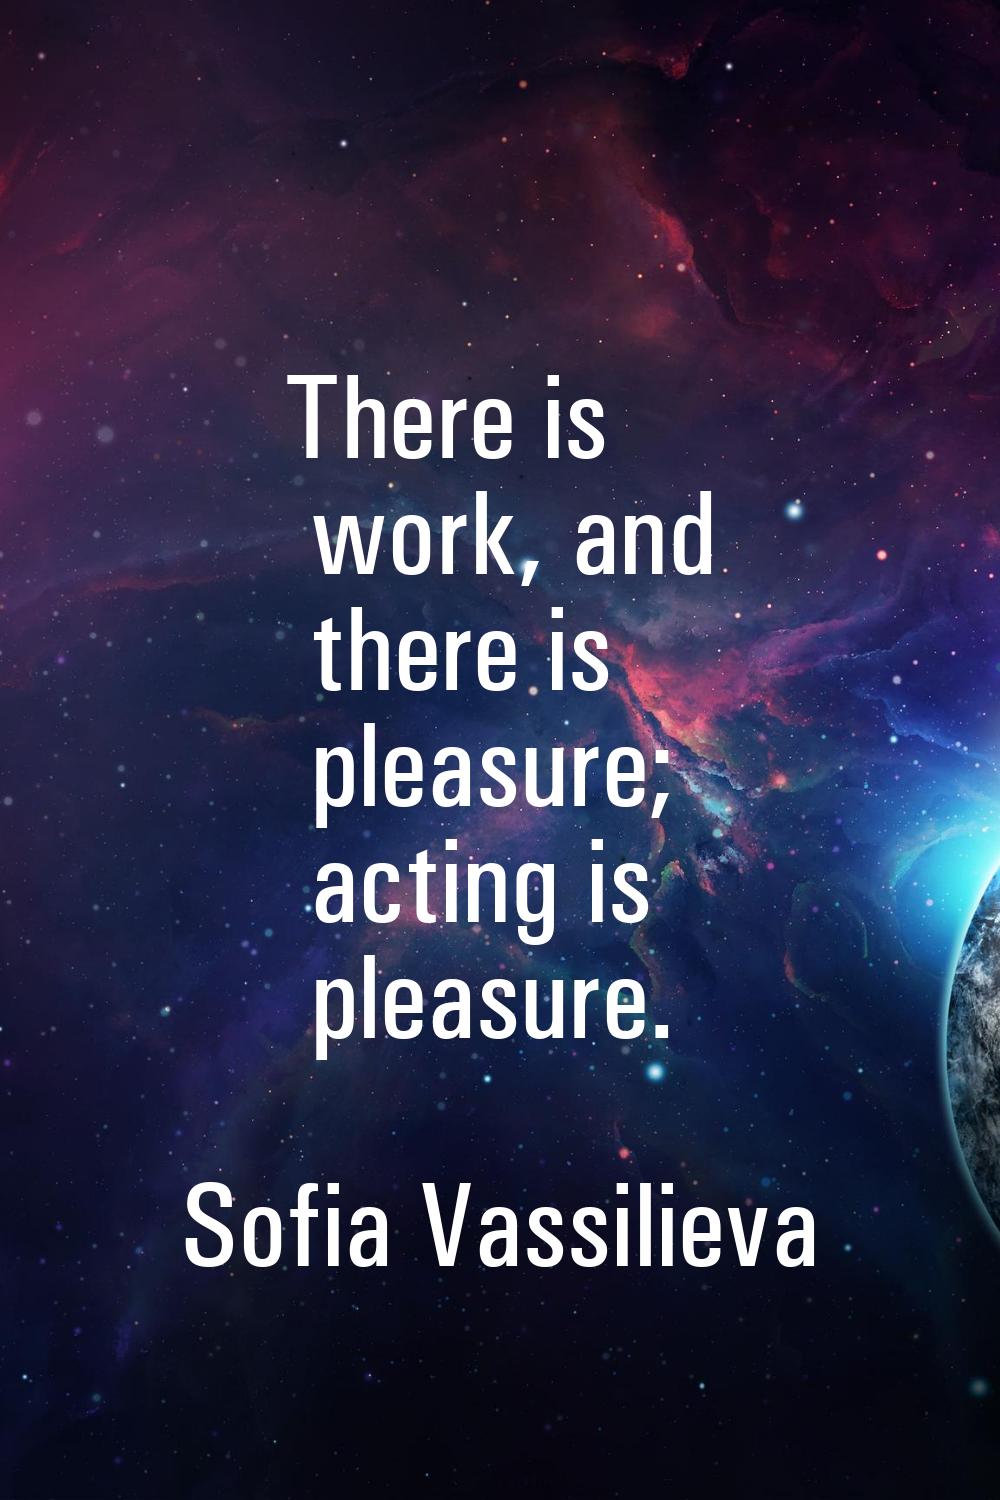 There is work, and there is pleasure; acting is pleasure.